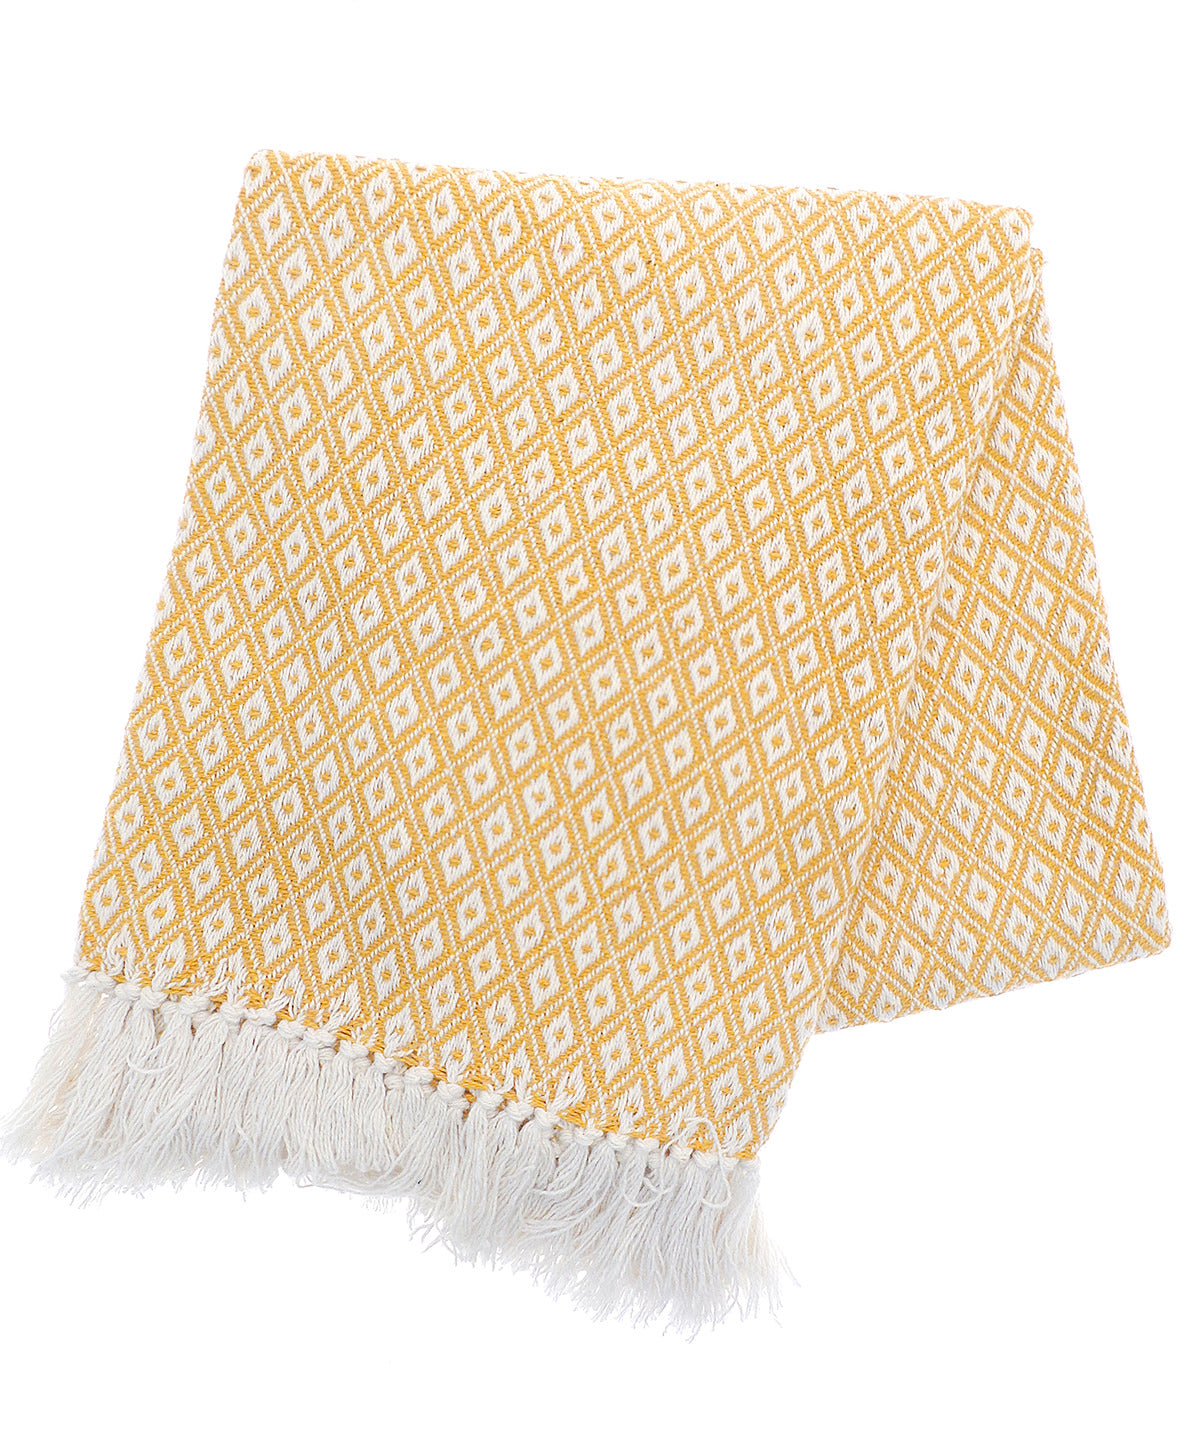 Personalised Blankets - Light Yellow Home & Living Oxford recycled throw